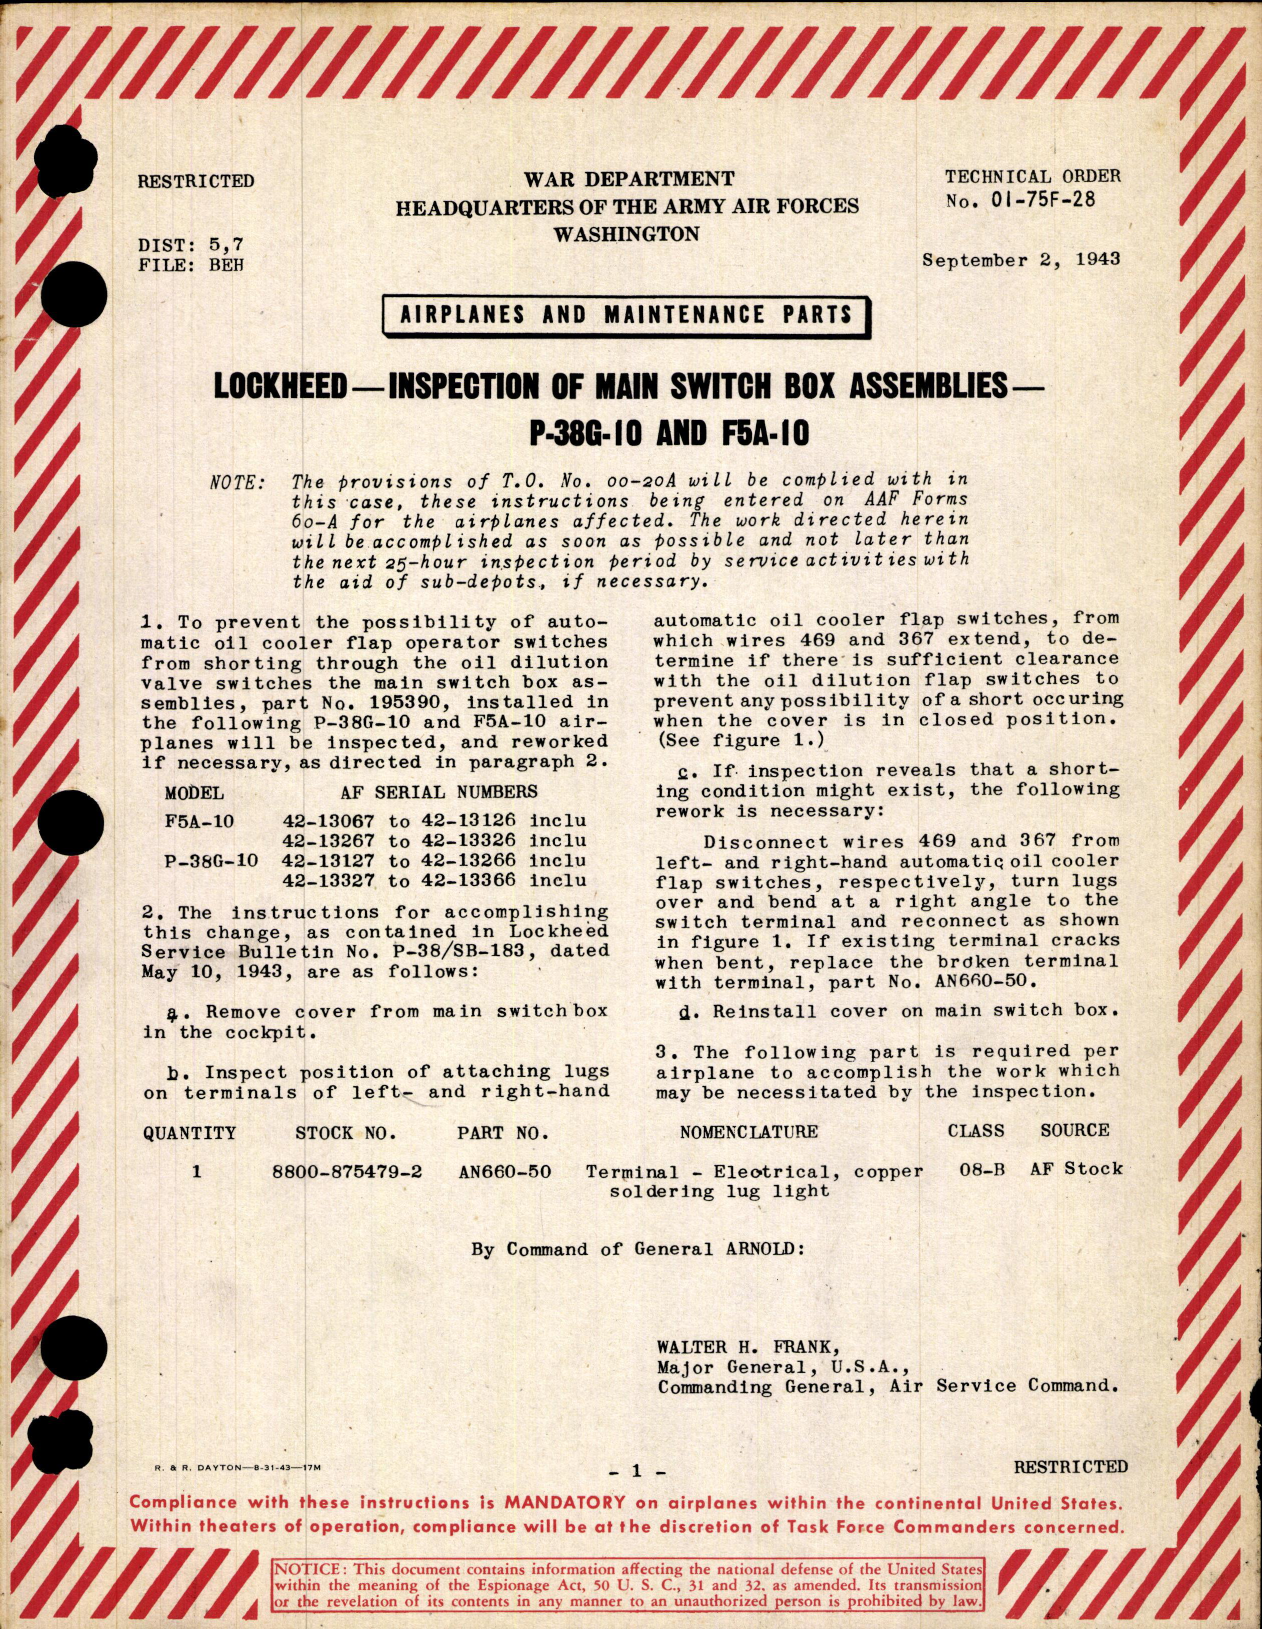 Sample page 1 from AirCorps Library document: Inspection of Main Switch Box Assemblies for P-38G-10 and F5A-10